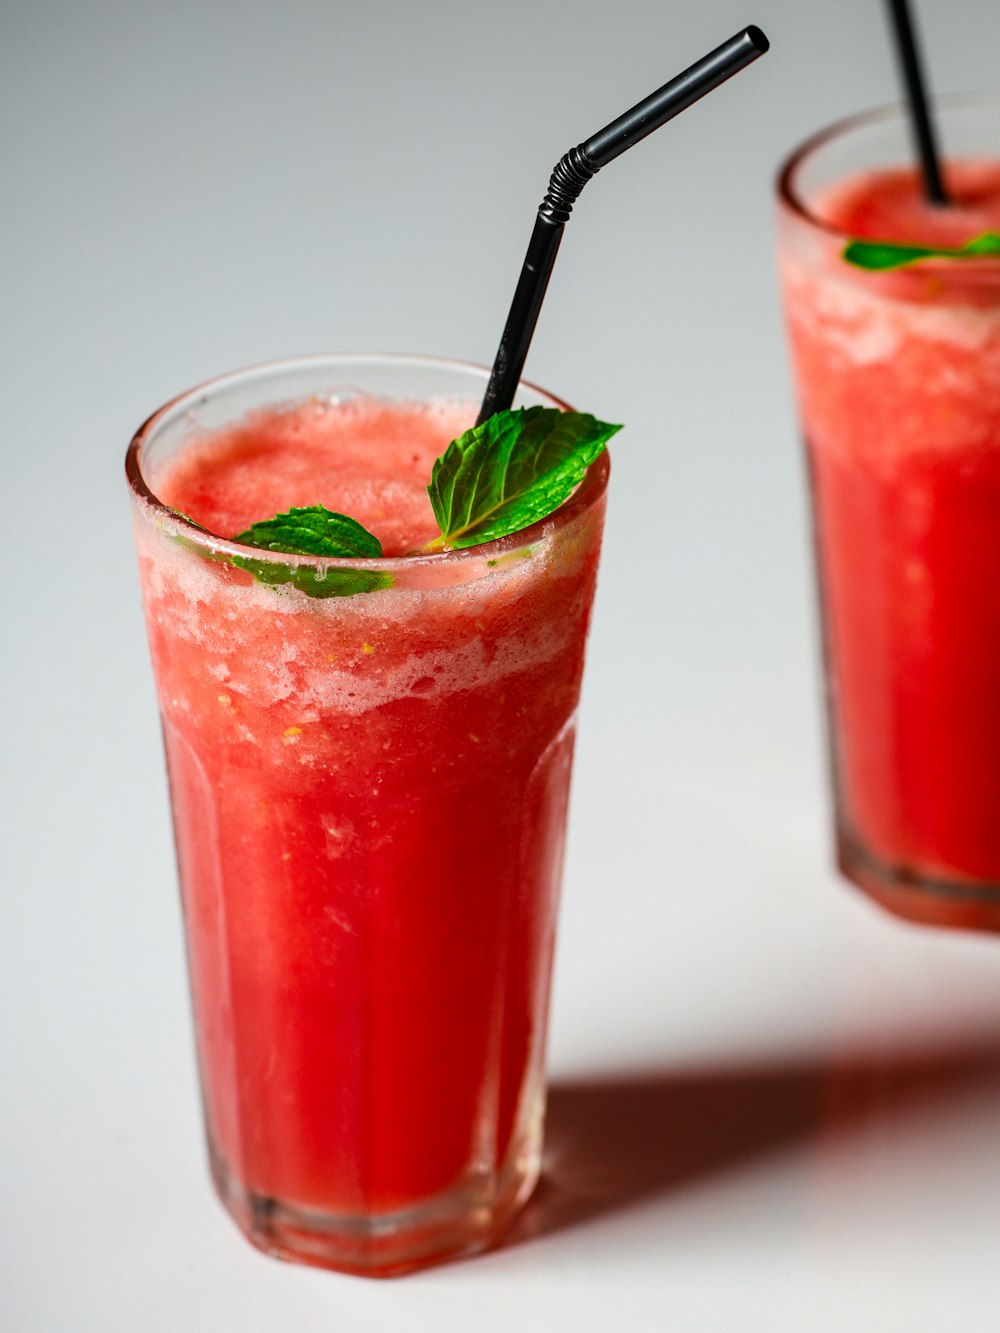 two glasses of watermelon drink with a black straw